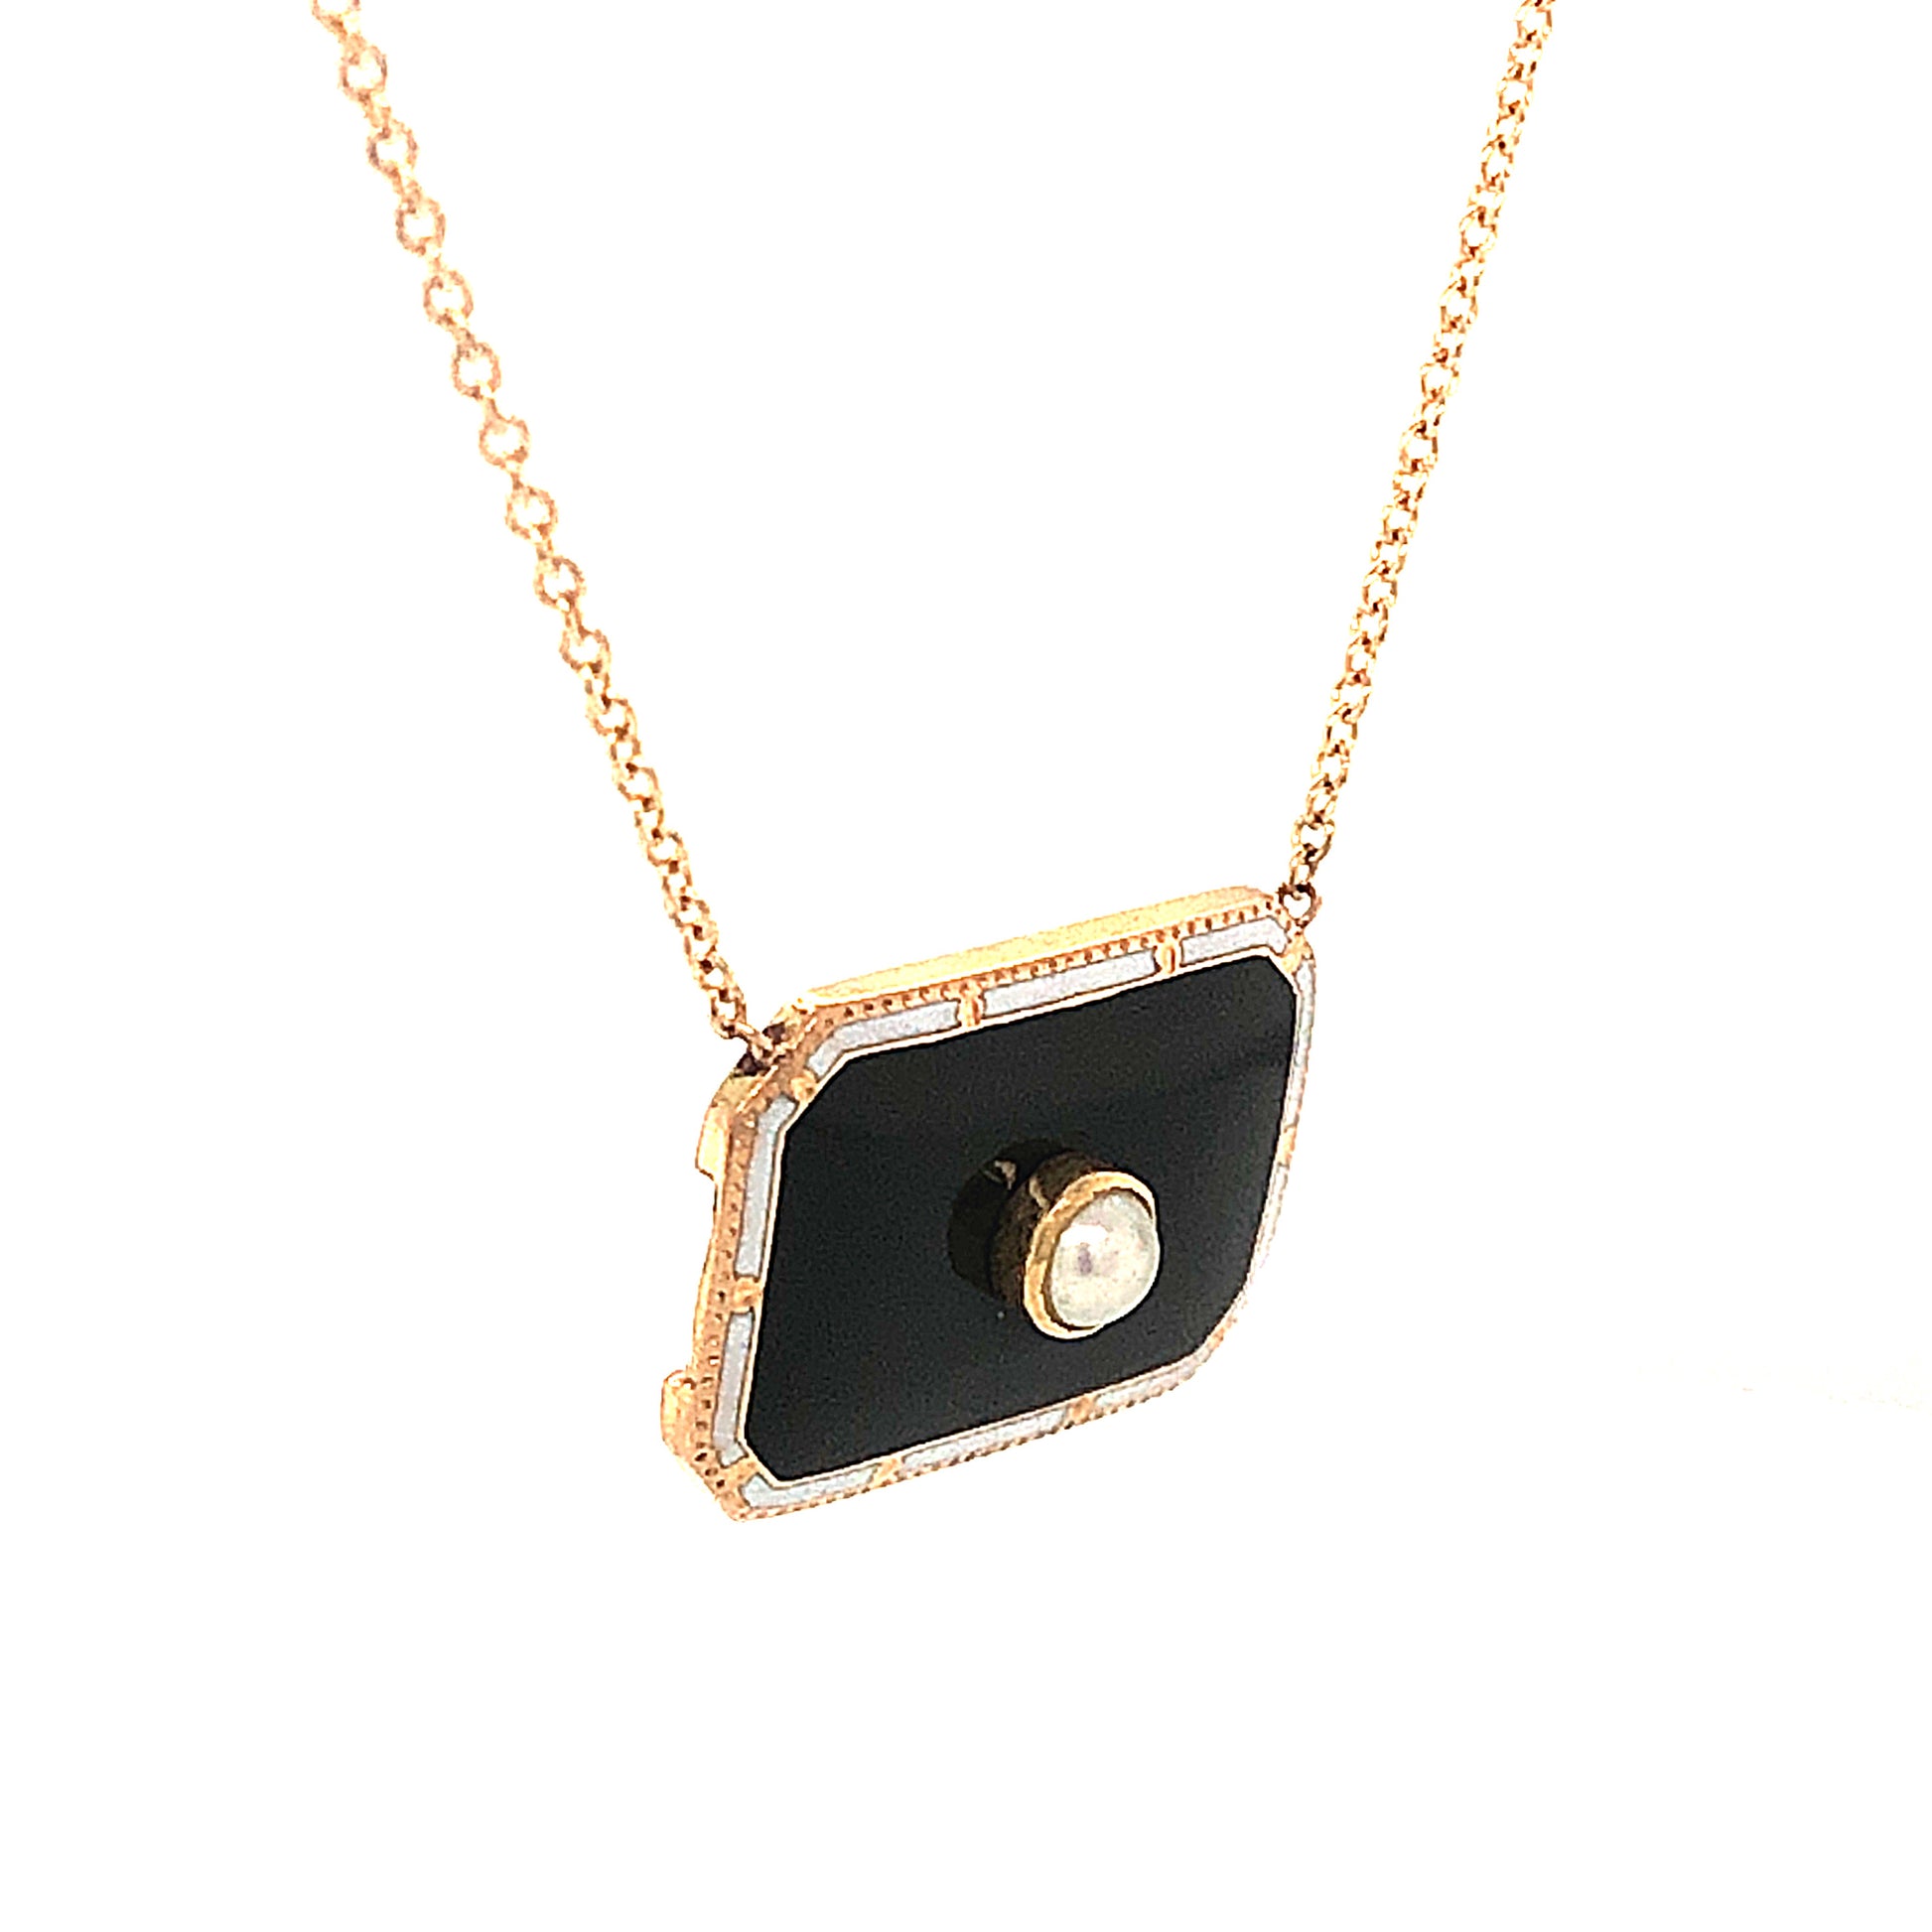 Enamel & Pearl Pendant Necklace in 14k Yellow GoldComposition: Platinum Total Gram Weight: 3.7 g Inscription: In Memory of F.M. , March 13th 1922 , 14k , MS CO
      